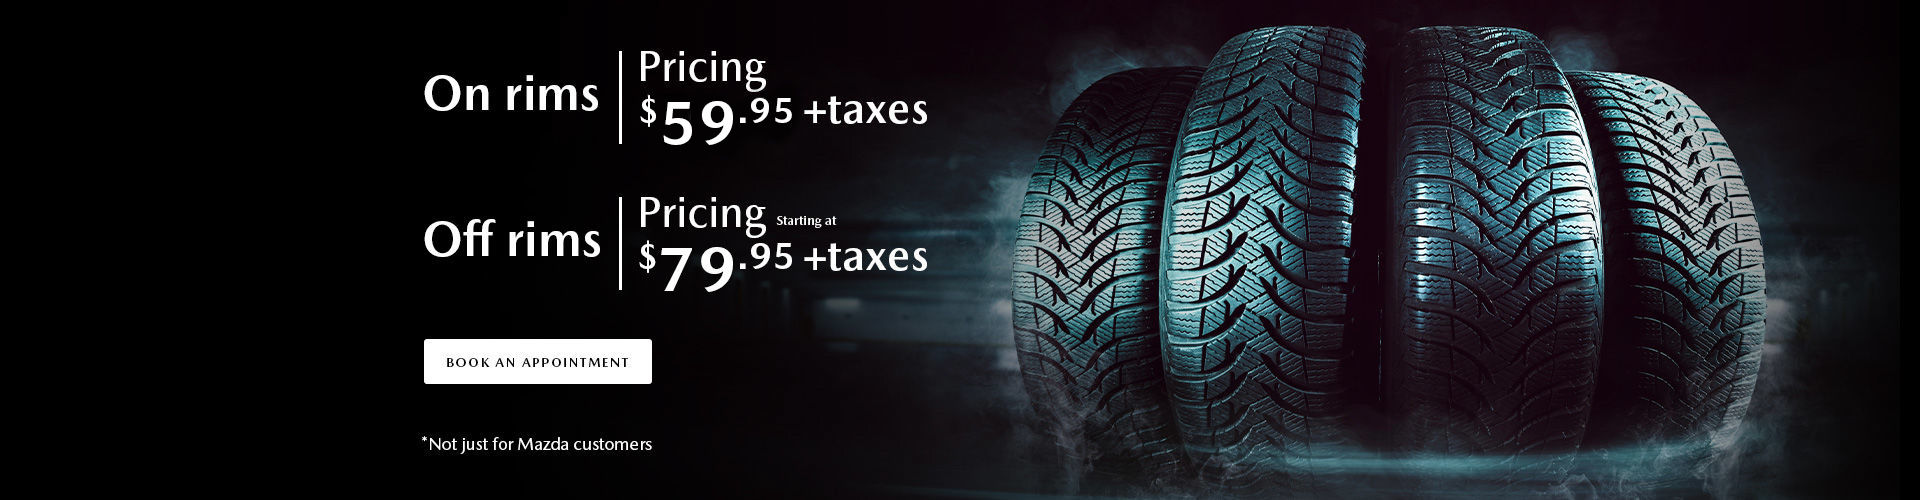 Tires Promotions